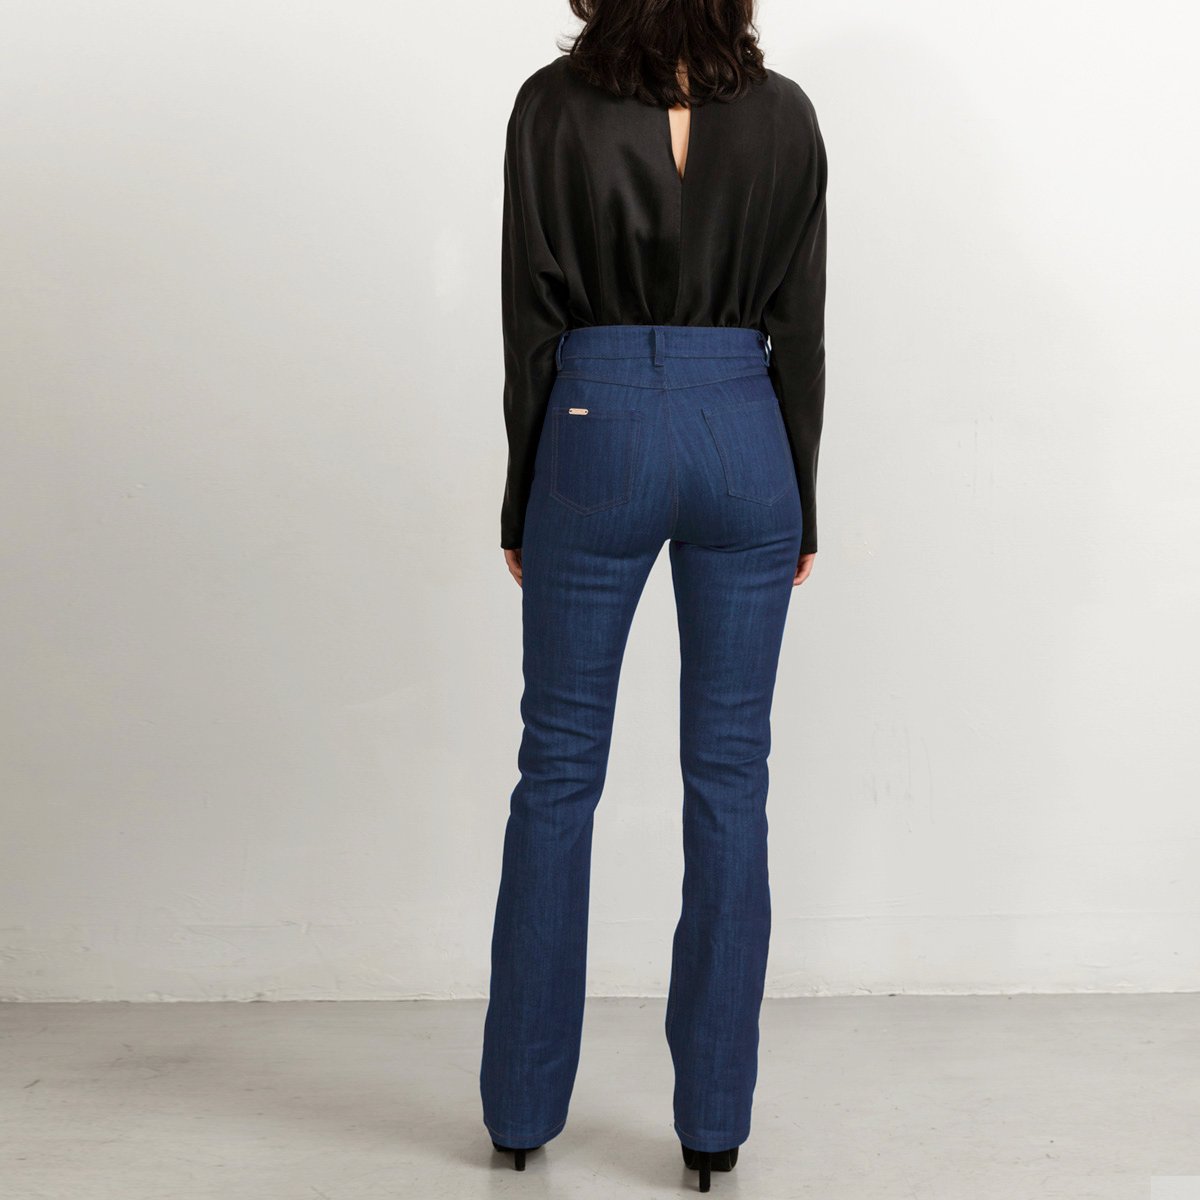 Classic mid bue made-to-measure flared jeans by Studio Heijne